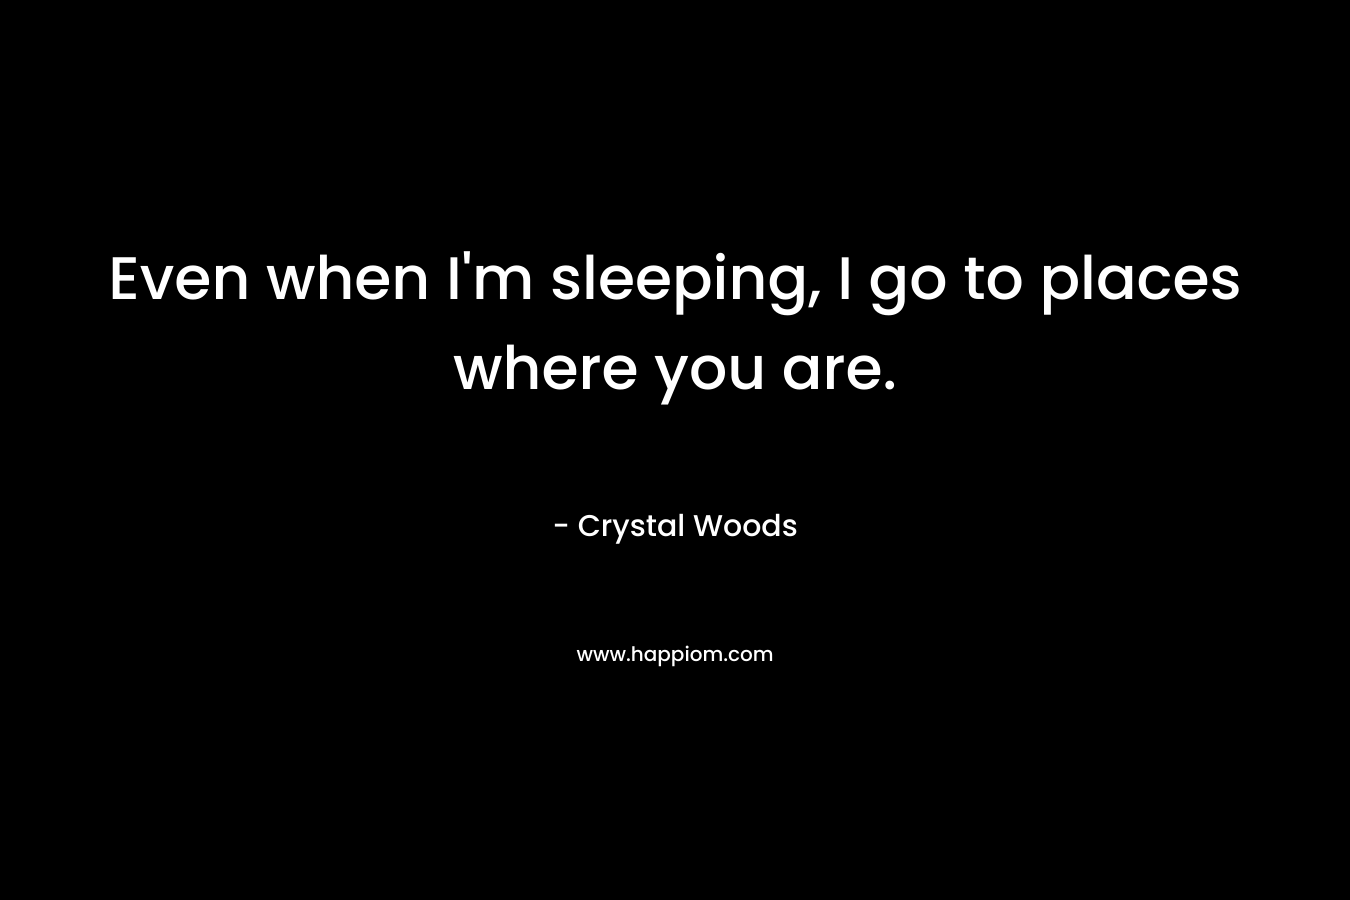 Even when I’m sleeping, I go to places where you are. – Crystal Woods